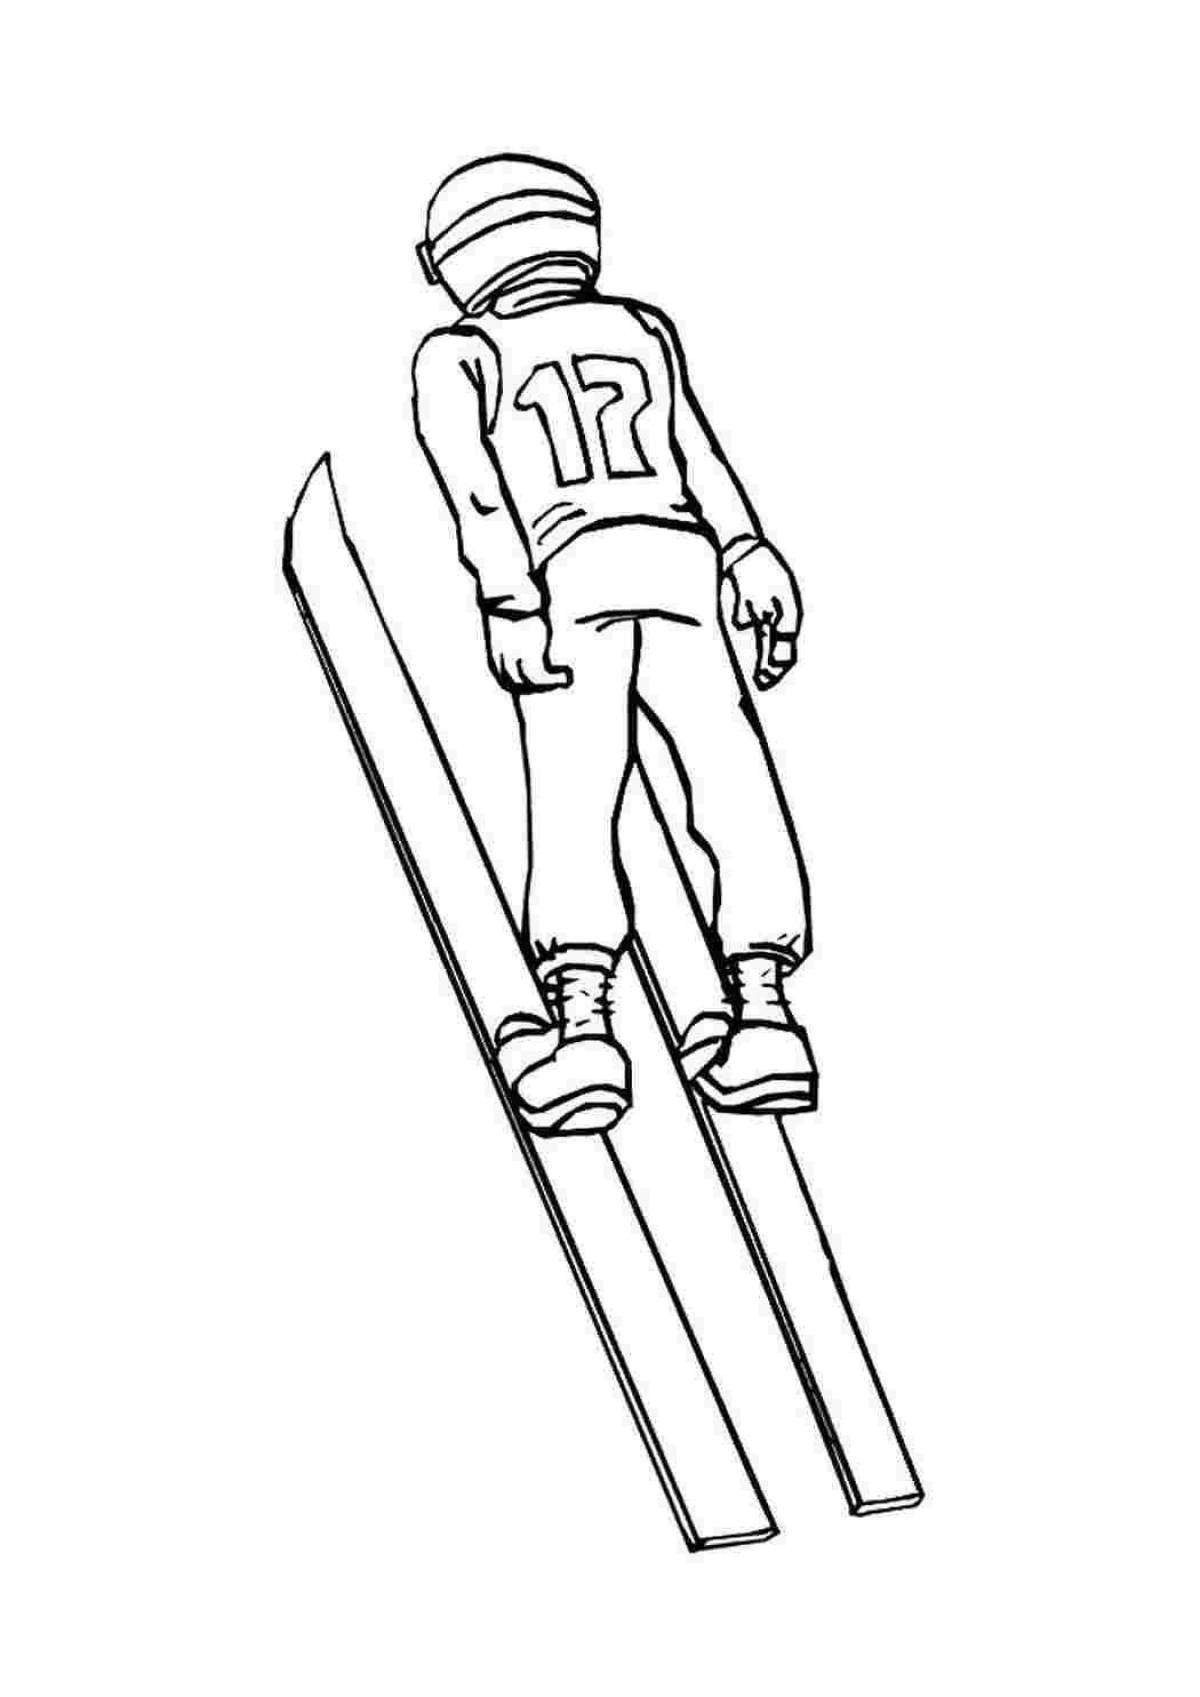 Charming skier coloring book